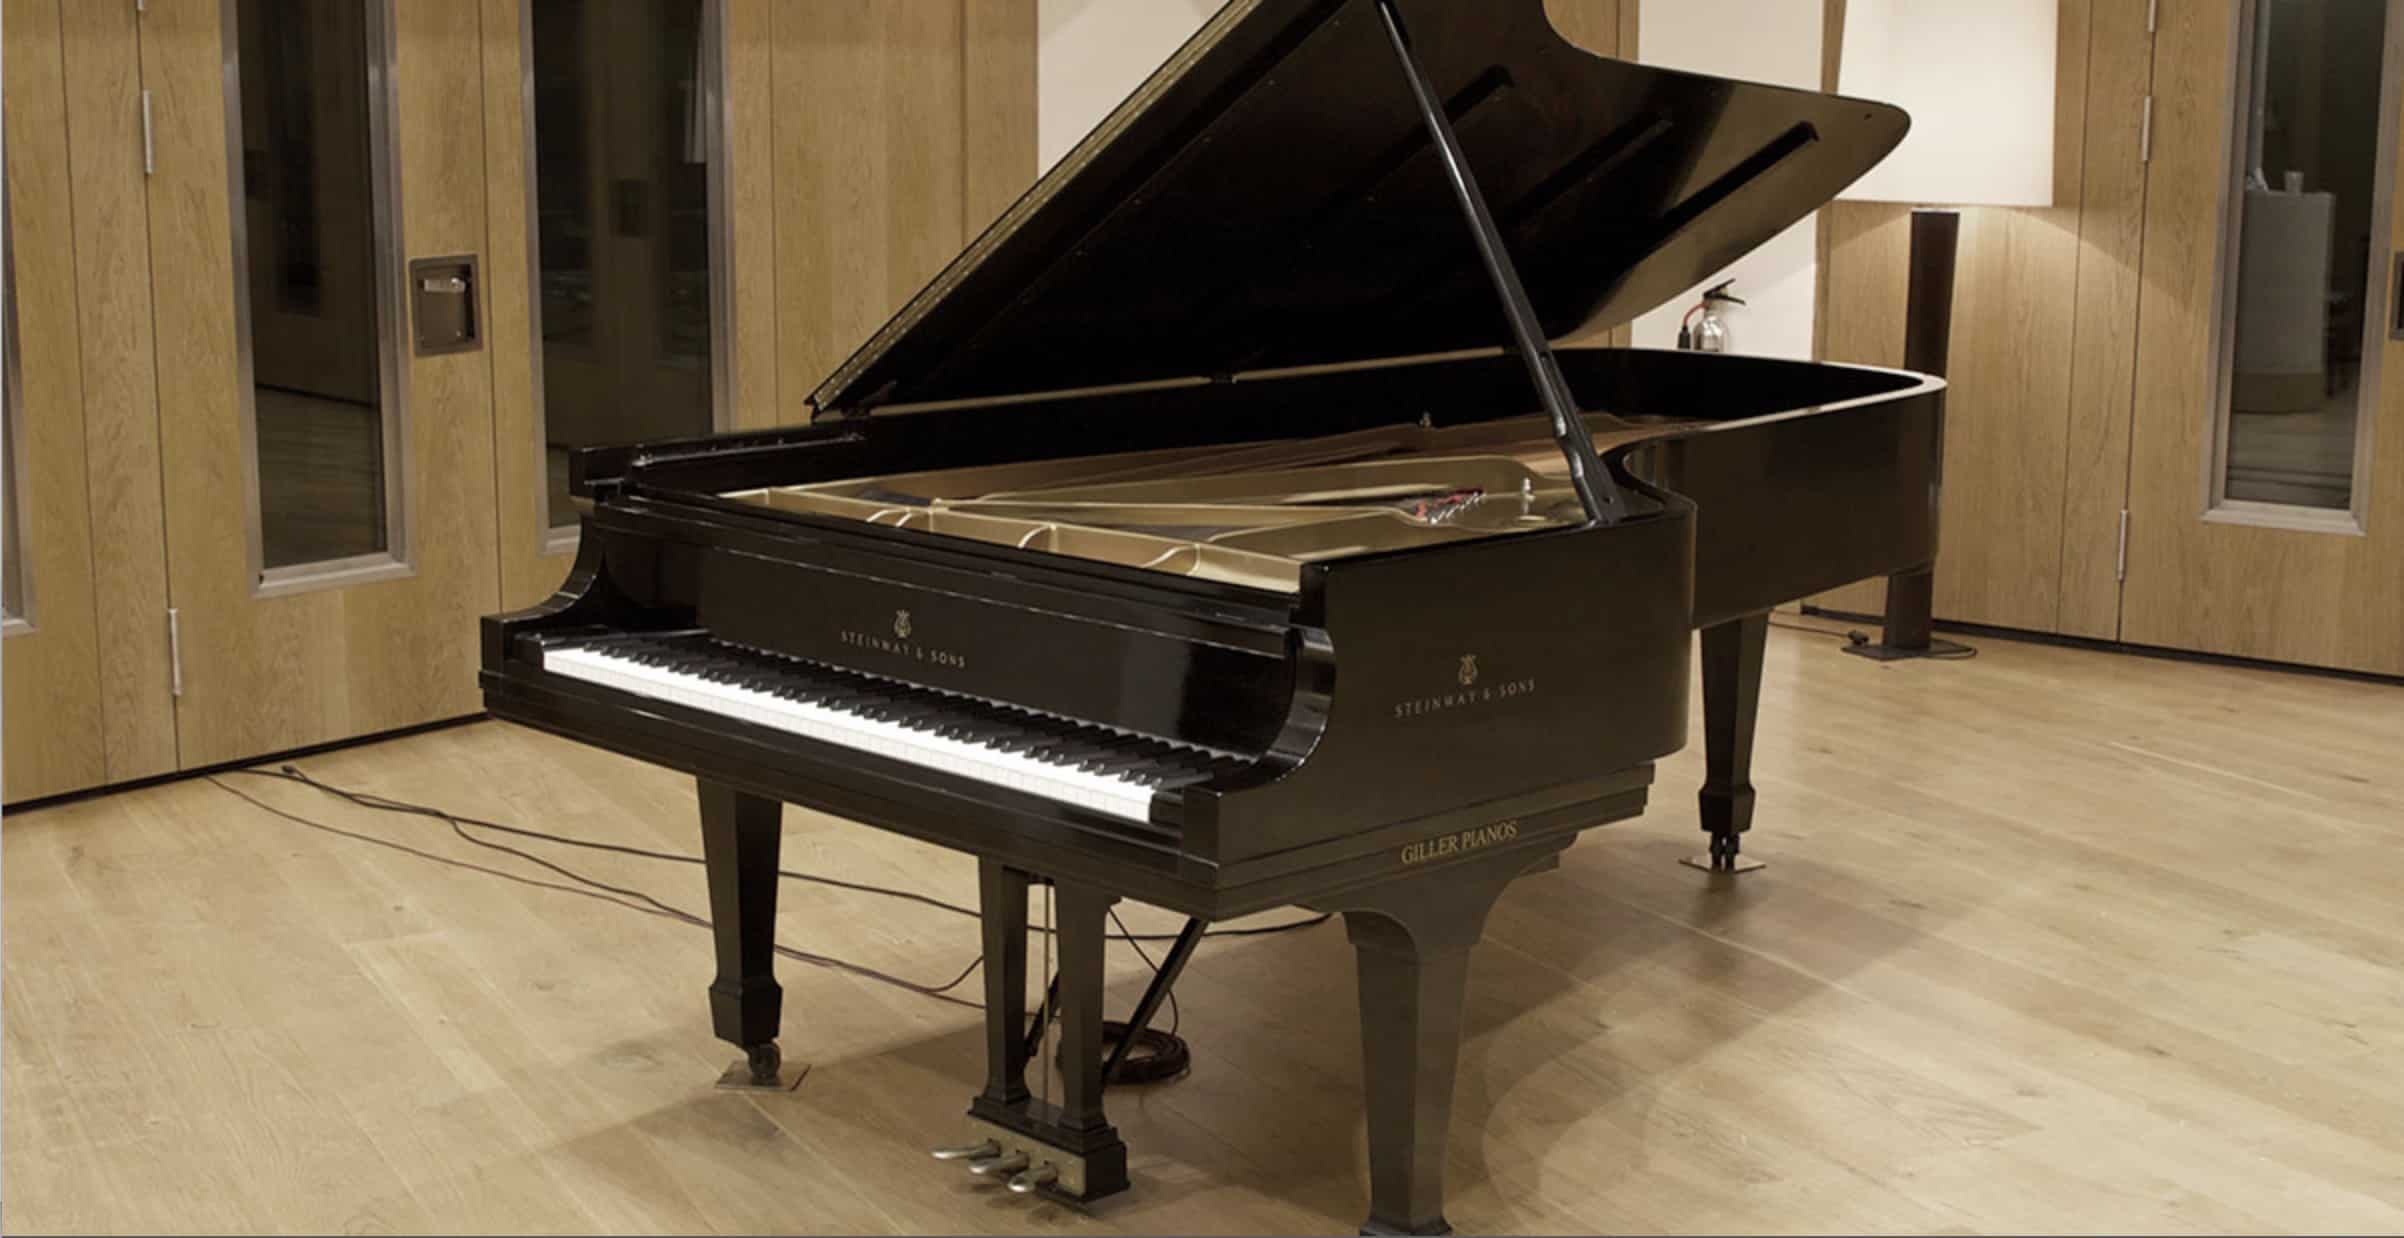 Soniccouture Announces Holiday Gift a Model D Grand Piano for Kontakt